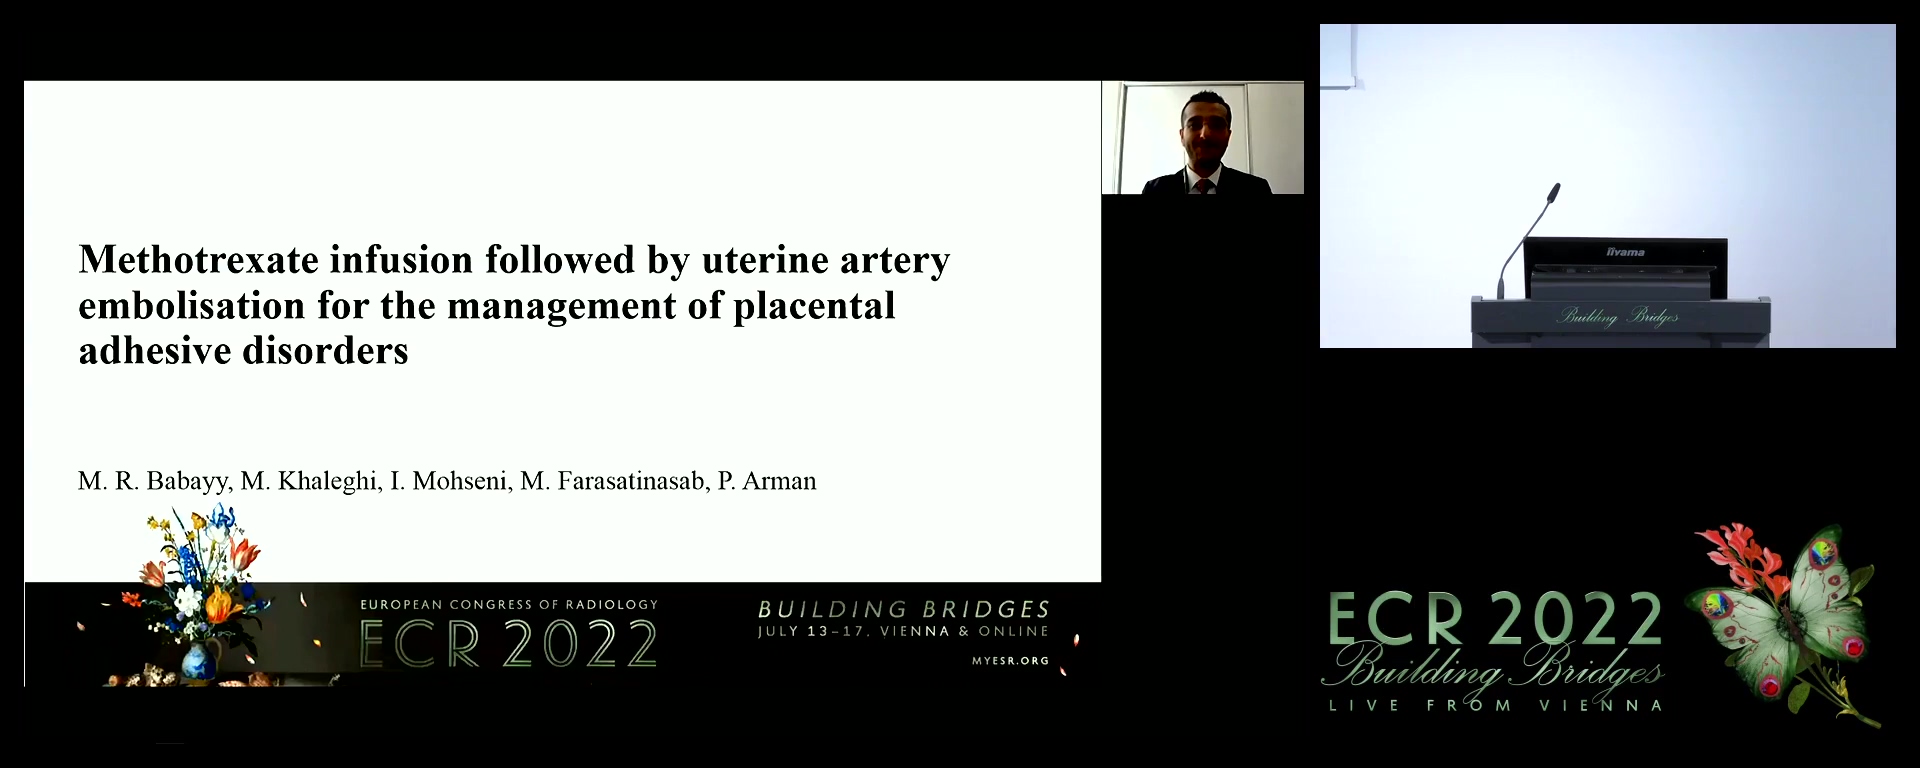 Methotrexate infusion followed by uterine artery embolisation for the management of placental adhesive disorders - Mohammadreza Khaleghi, Tehran / IR